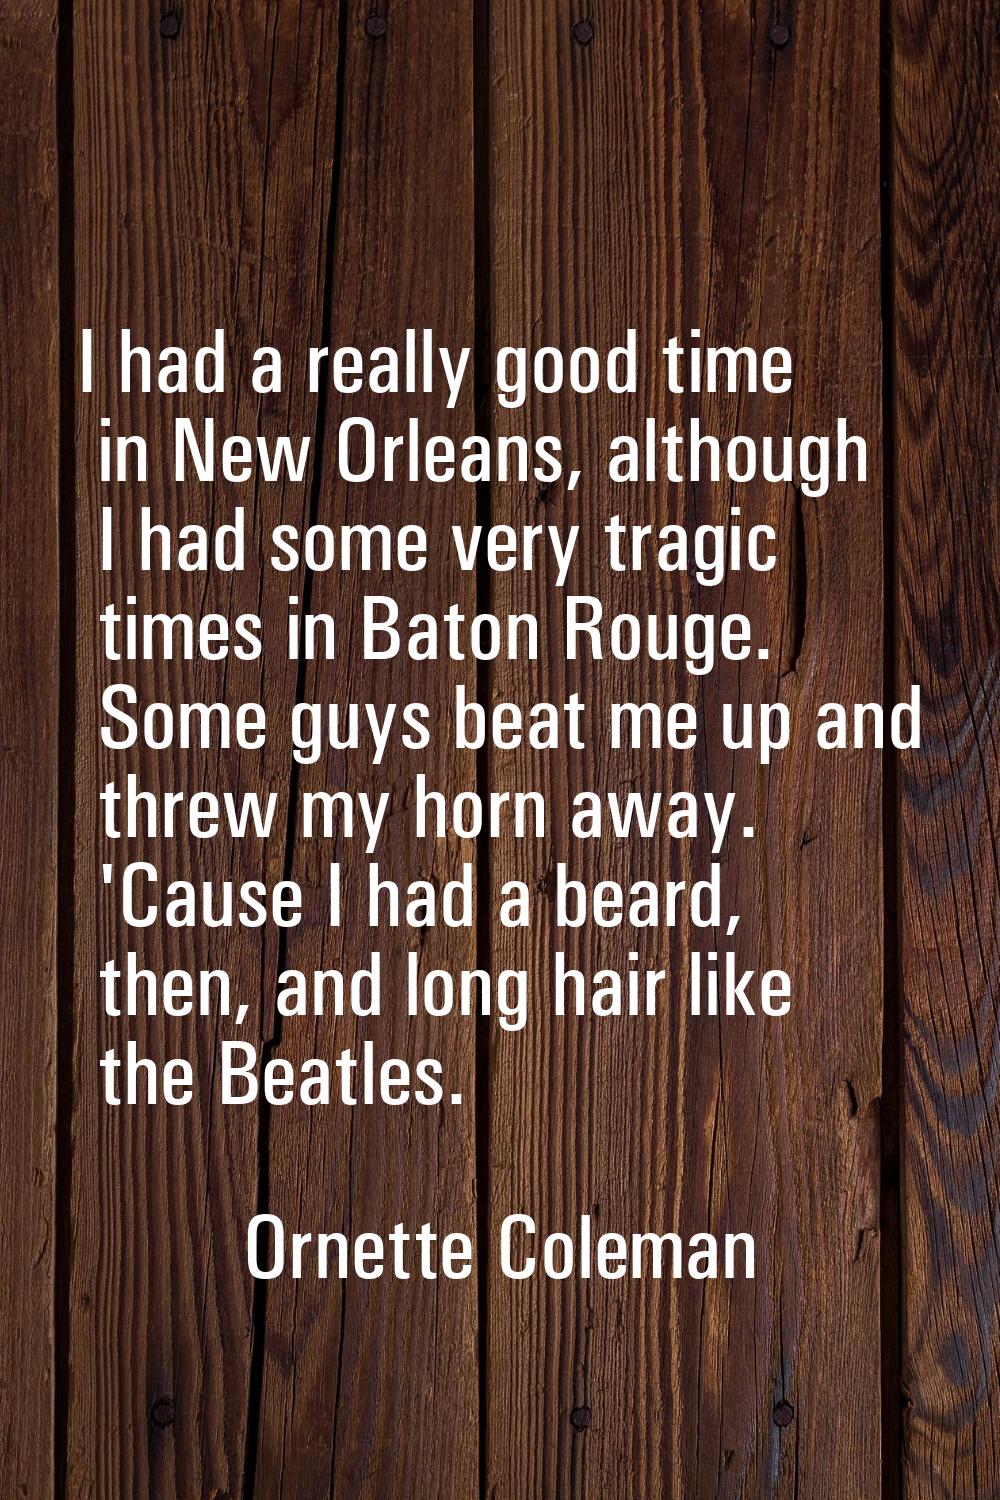 I had a really good time in New Orleans, although I had some very tragic times in Baton Rouge. Some